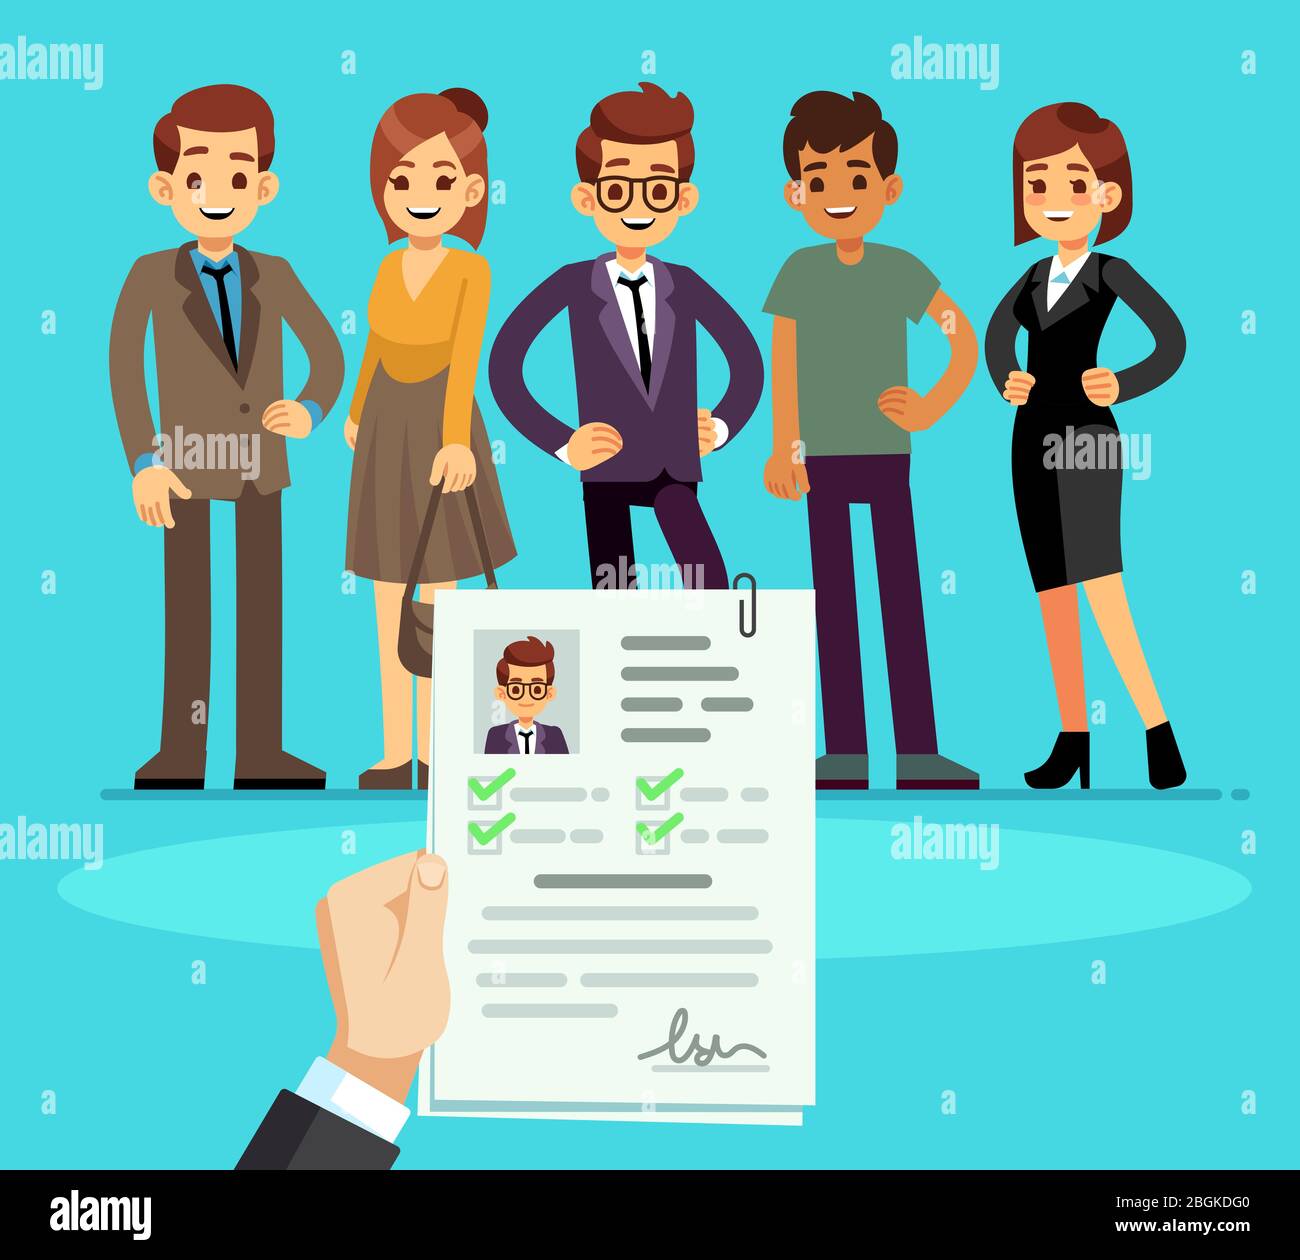 Recruitment. Recruiter choosing candidates with cv resume. Human resource and job interview vector concept. Illustration of human candidate, hiring re Stock Vector